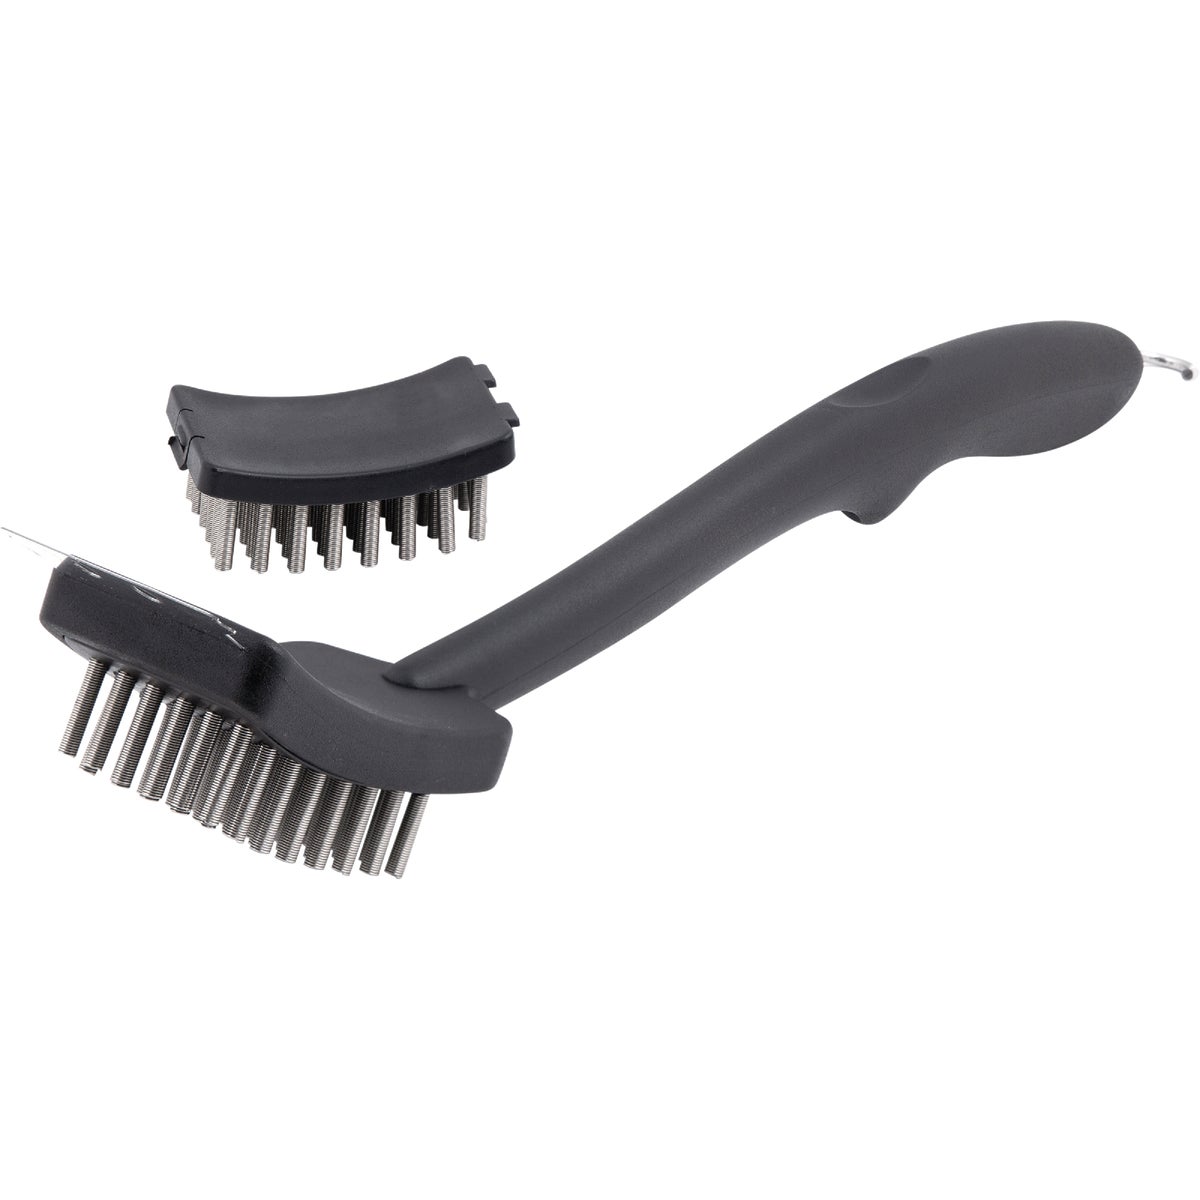 GrillPro 18.3 In. Steel Coil Spring Grill Cleaning Brush with Replacement Head